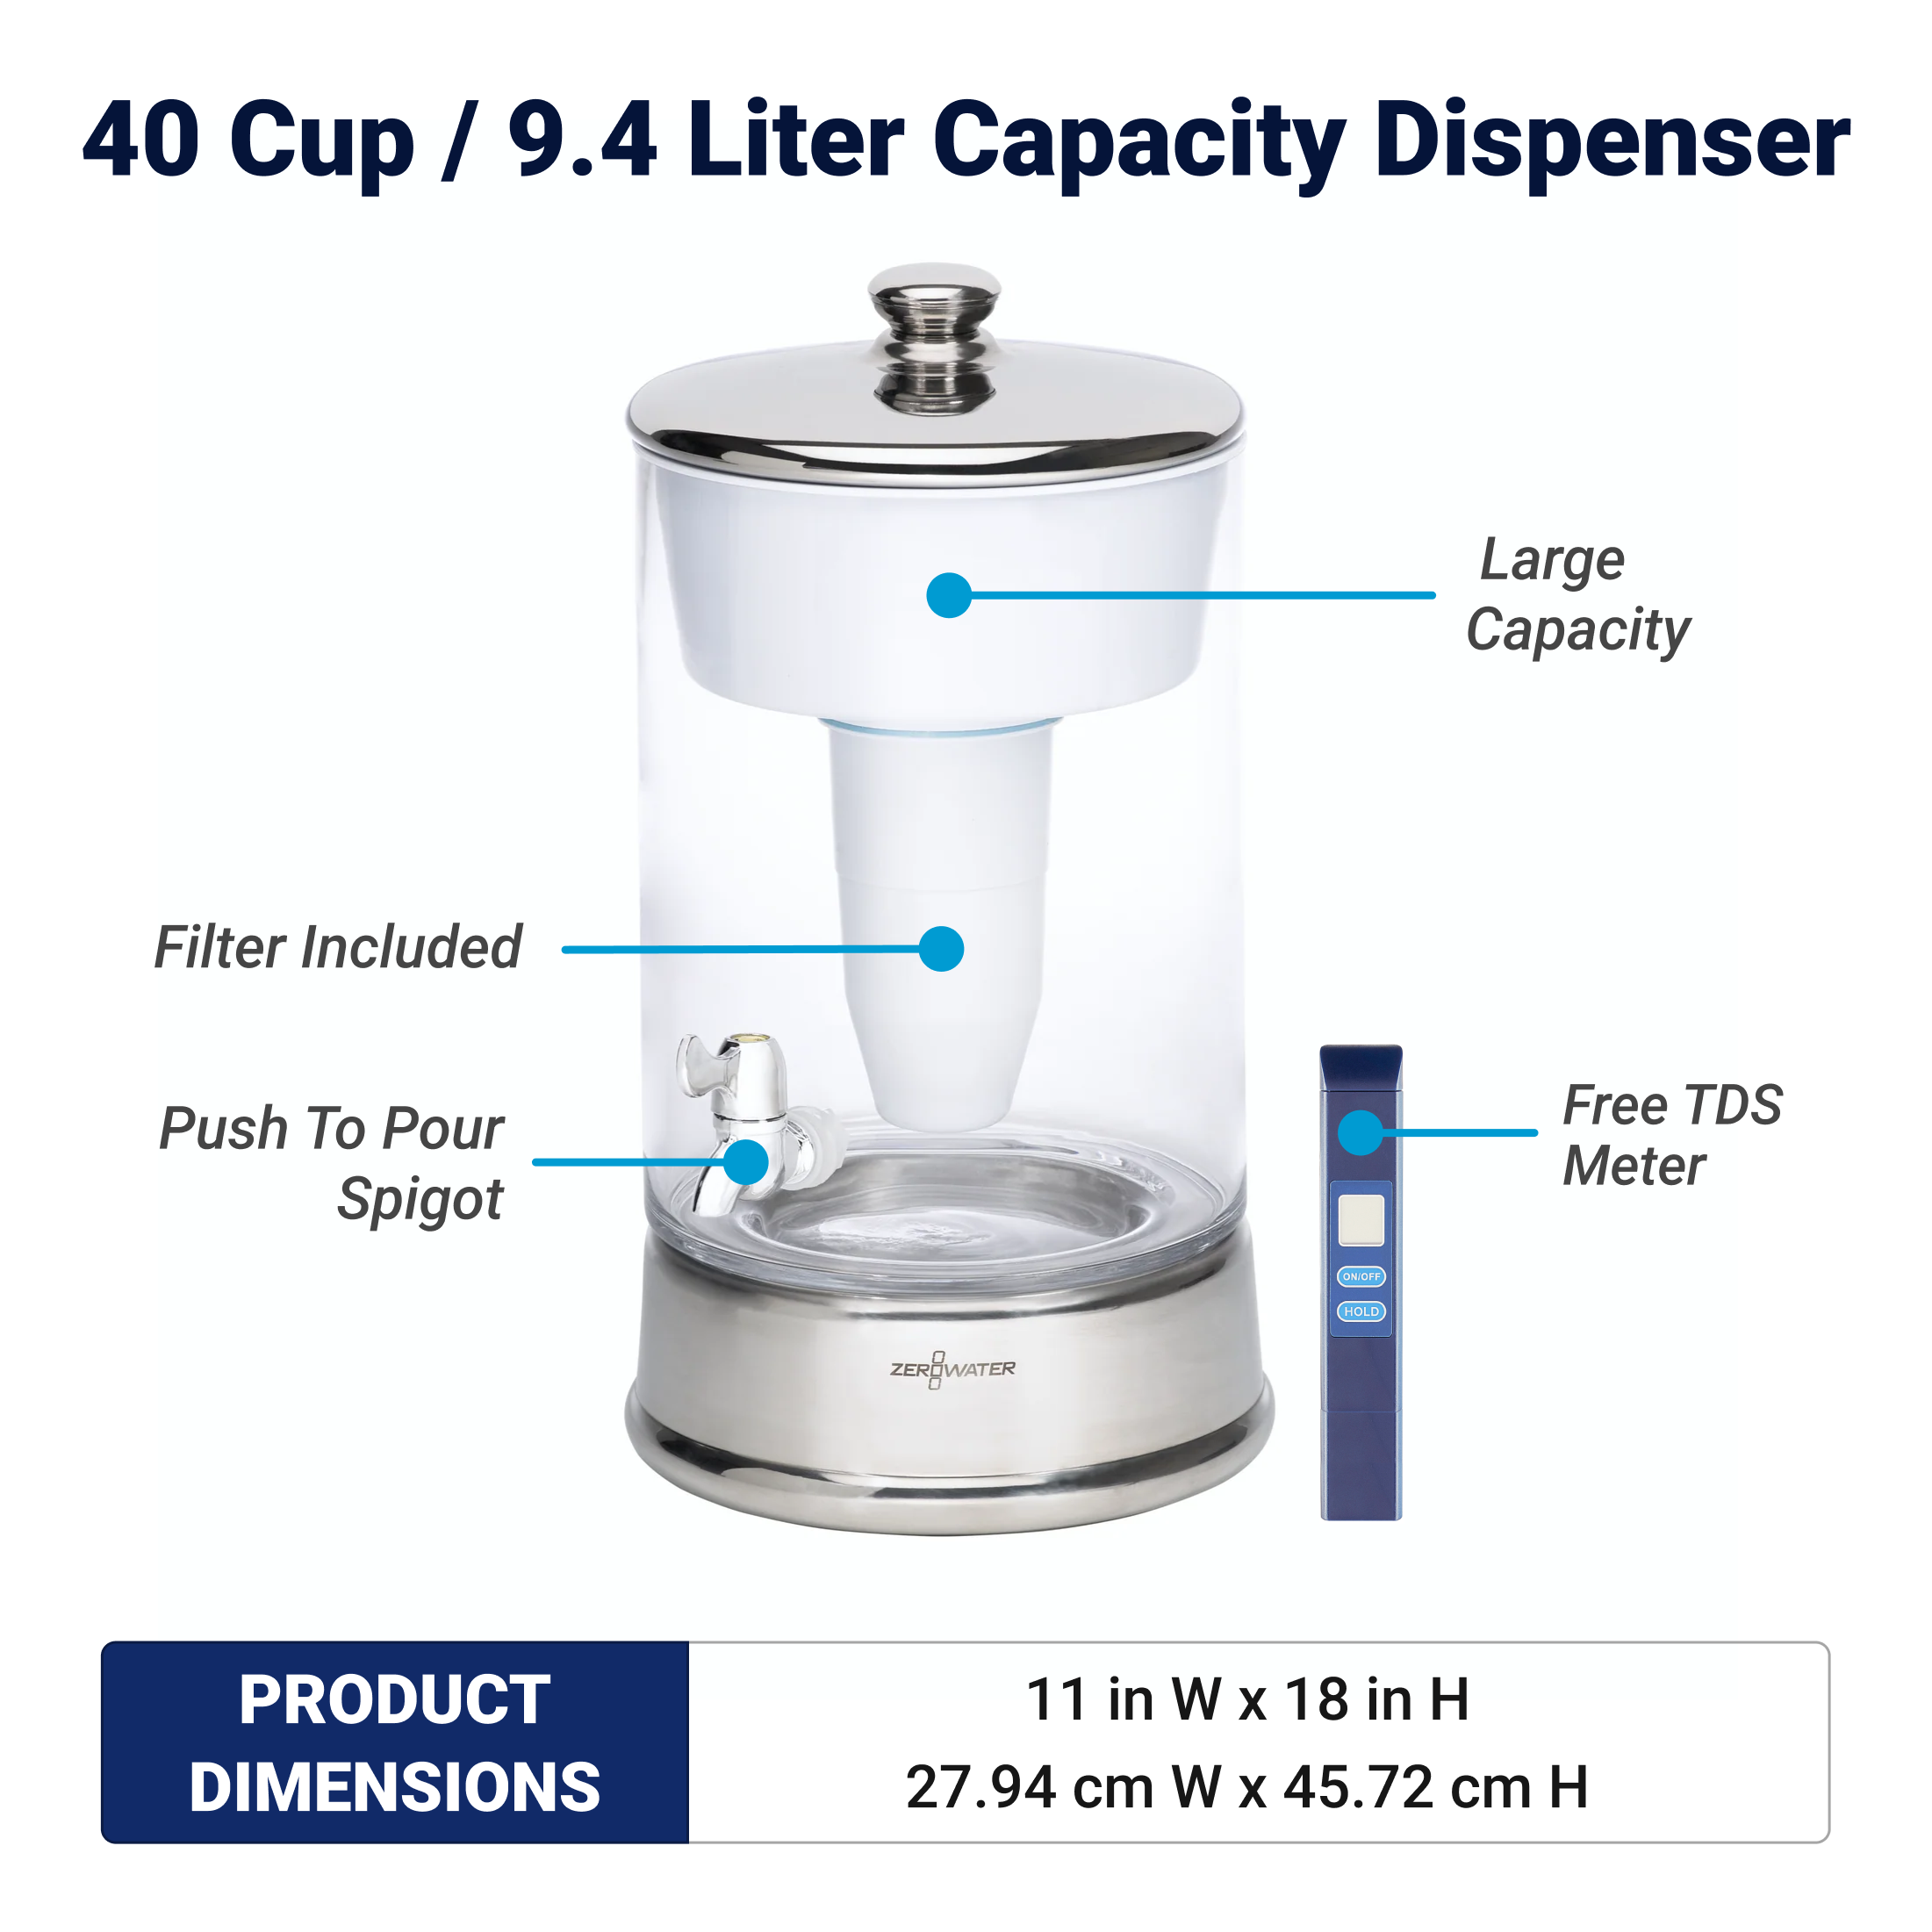 40 cup 9.4 liter capacity dispenser with product dimensions